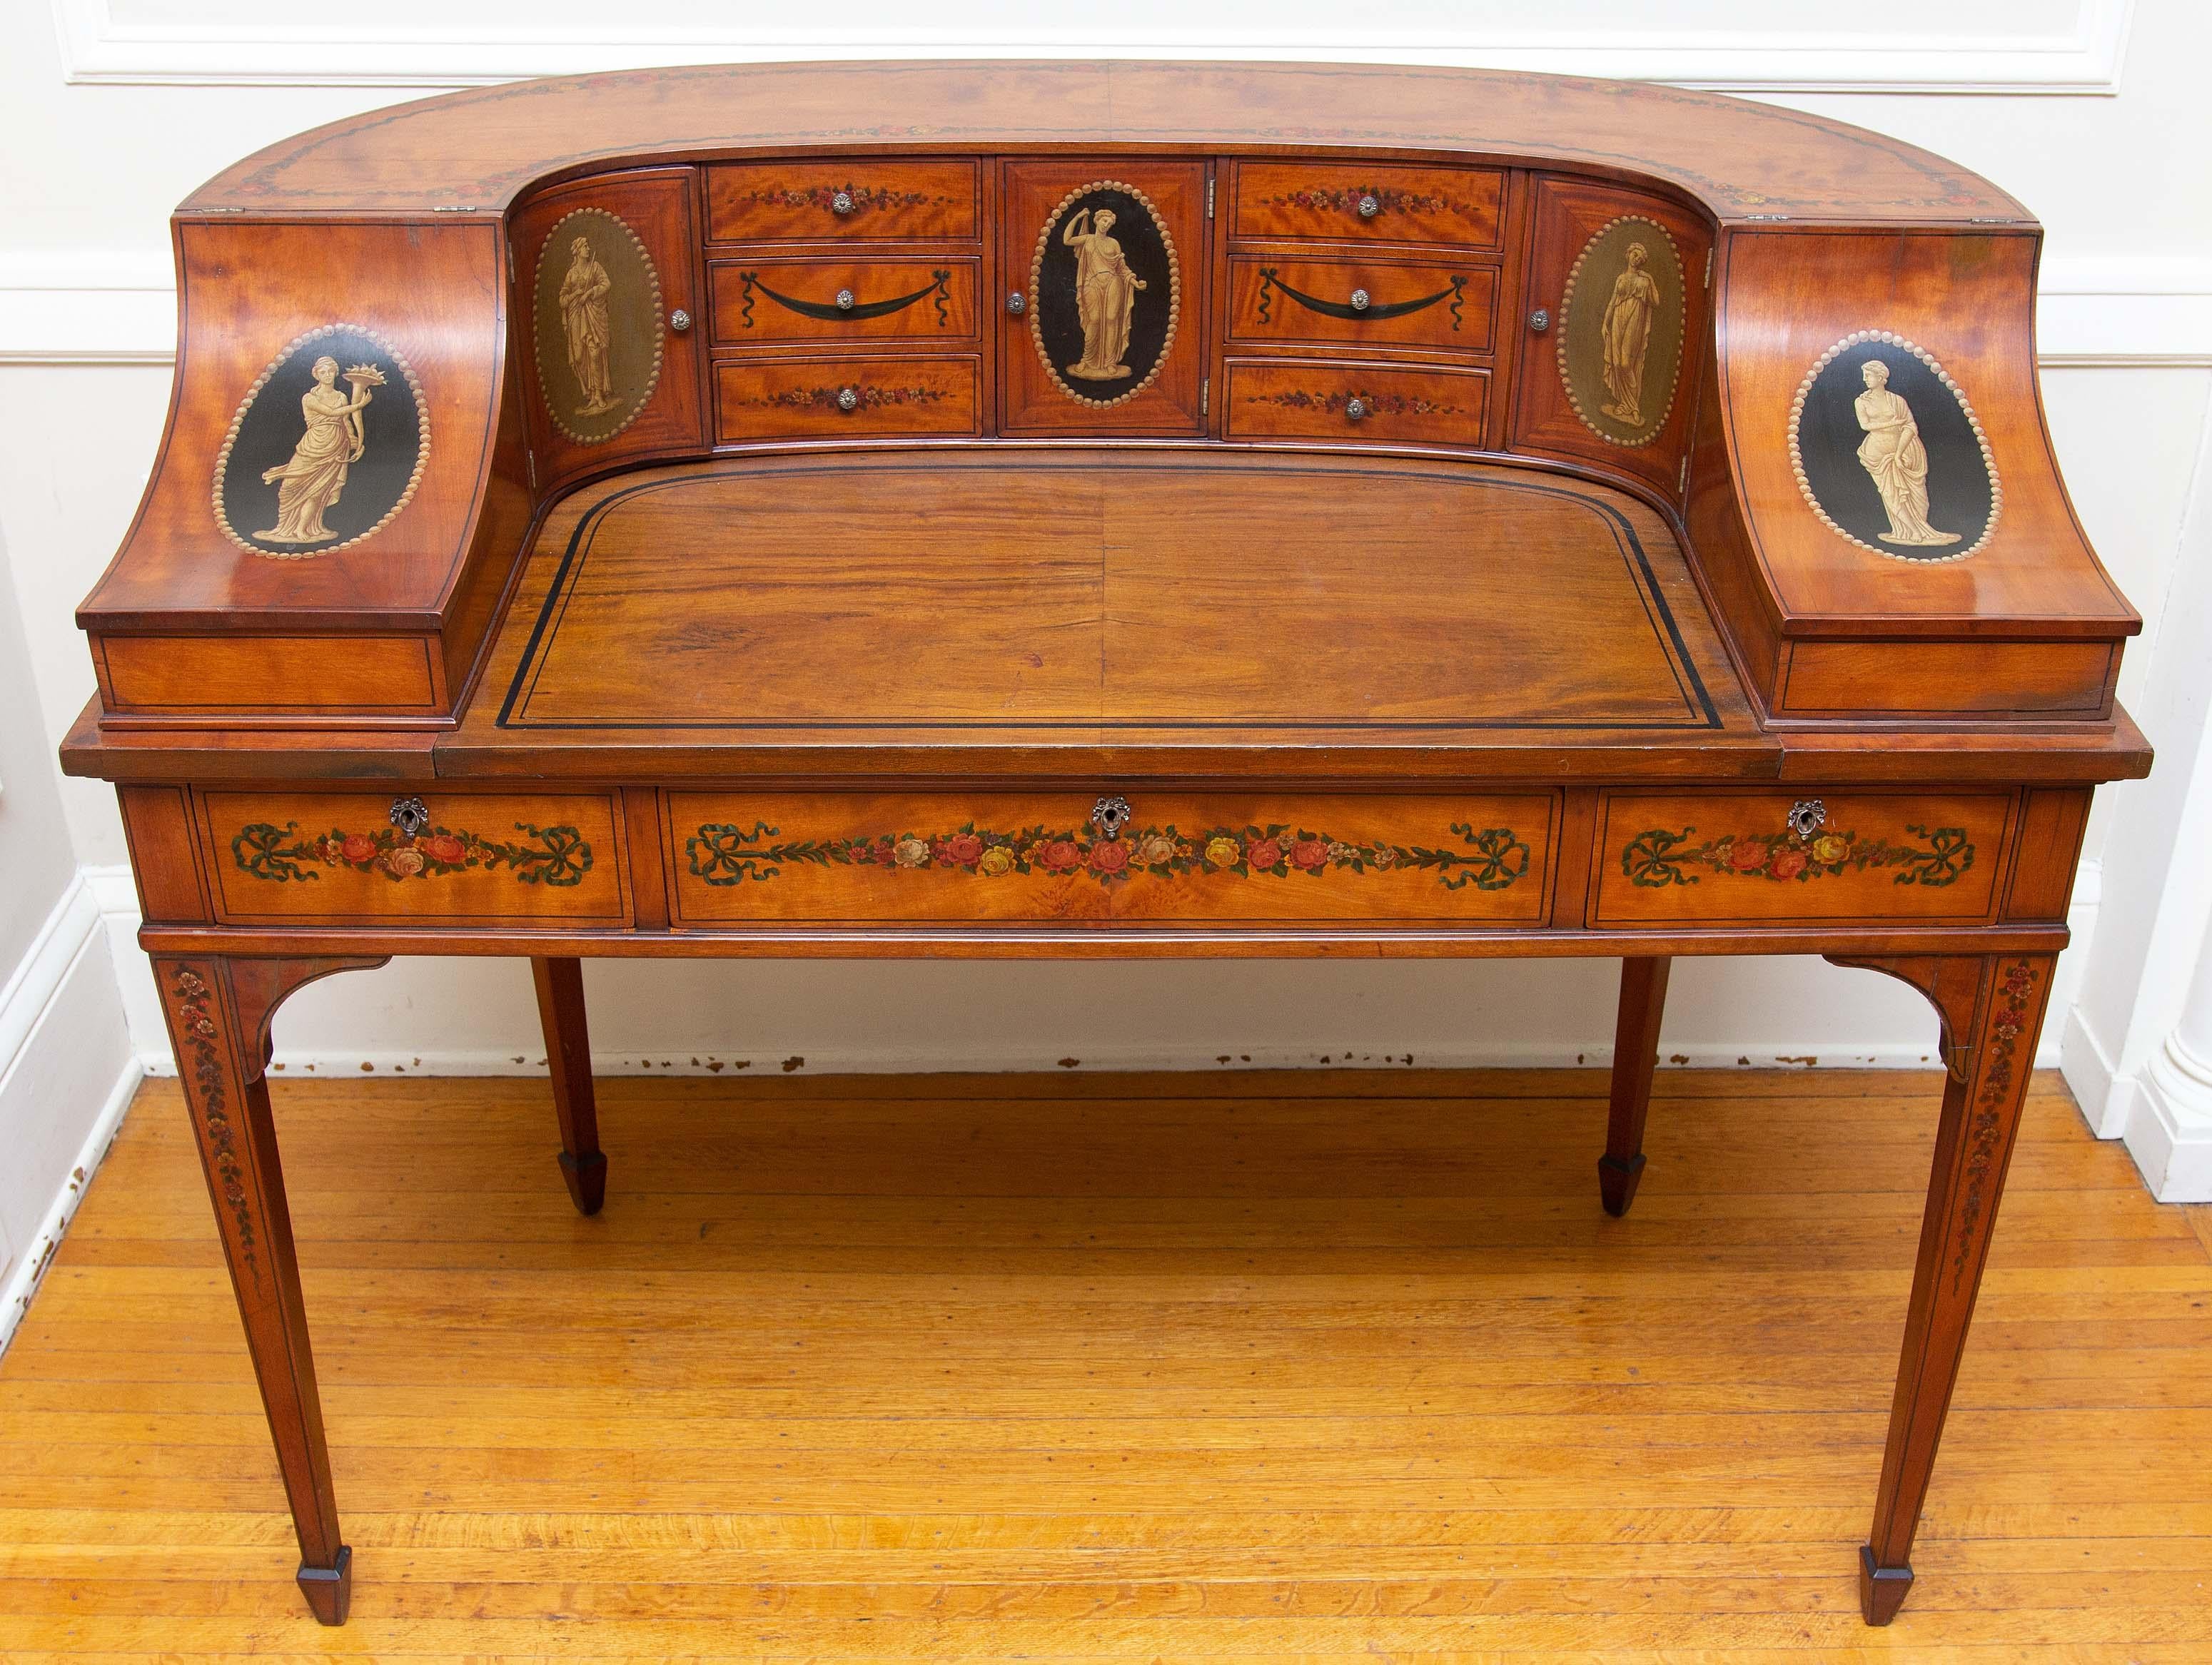 Presented by Joseph Dasta Antiques. Exceptional antique Edwardian hand painted Carlton house desk, circa 1900. Lots of storage. Finished on all sides.